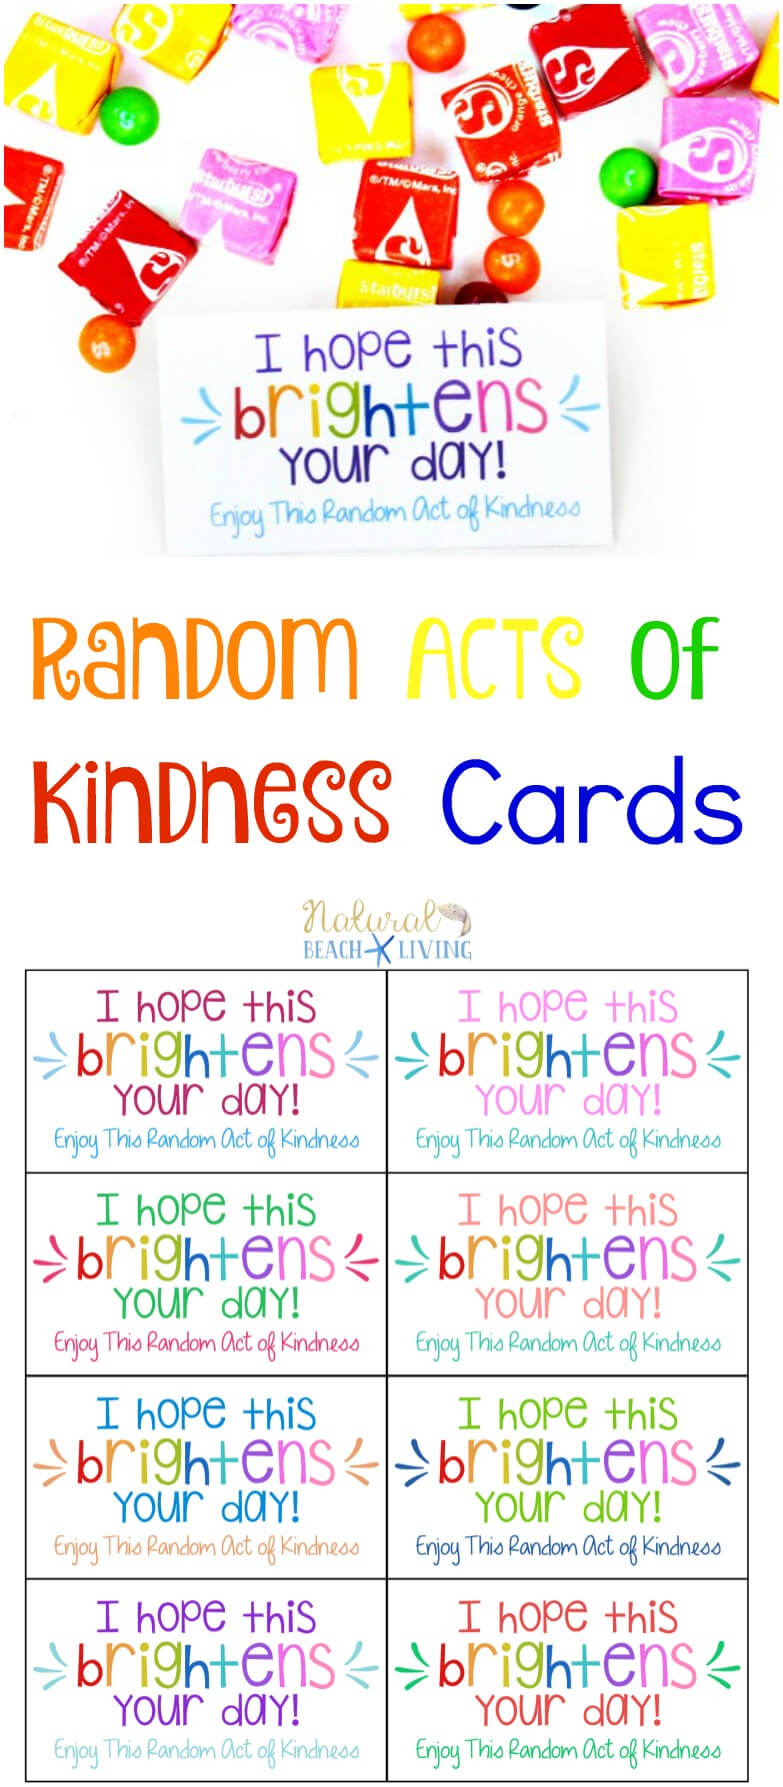 The Best Random Acts Of Kindness Printable Cards Free Throughout Random Acts Of Kindness Cards Templates